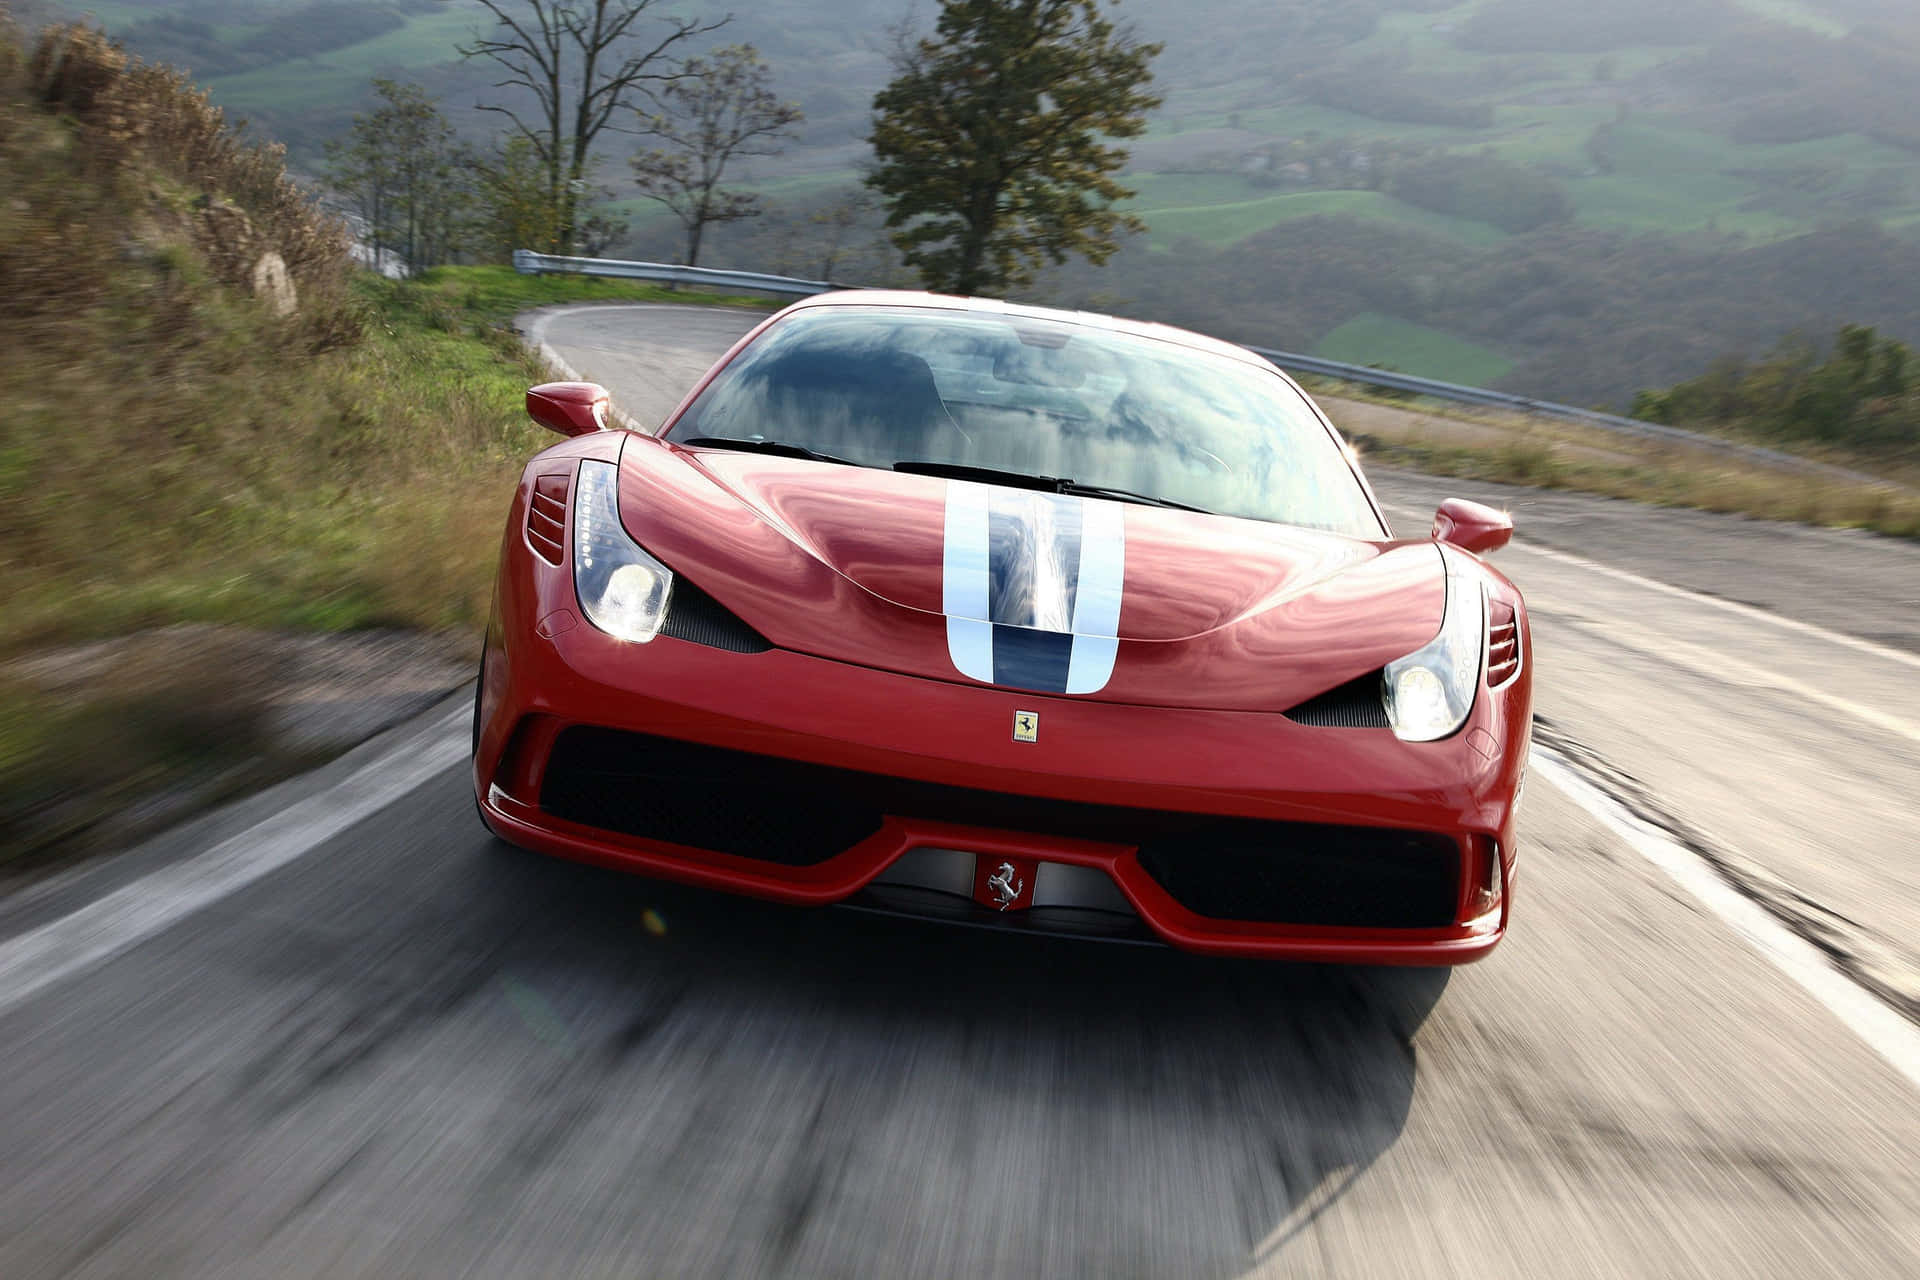 The Stunning Ferrari 458 Speciale in Action Wallpaper